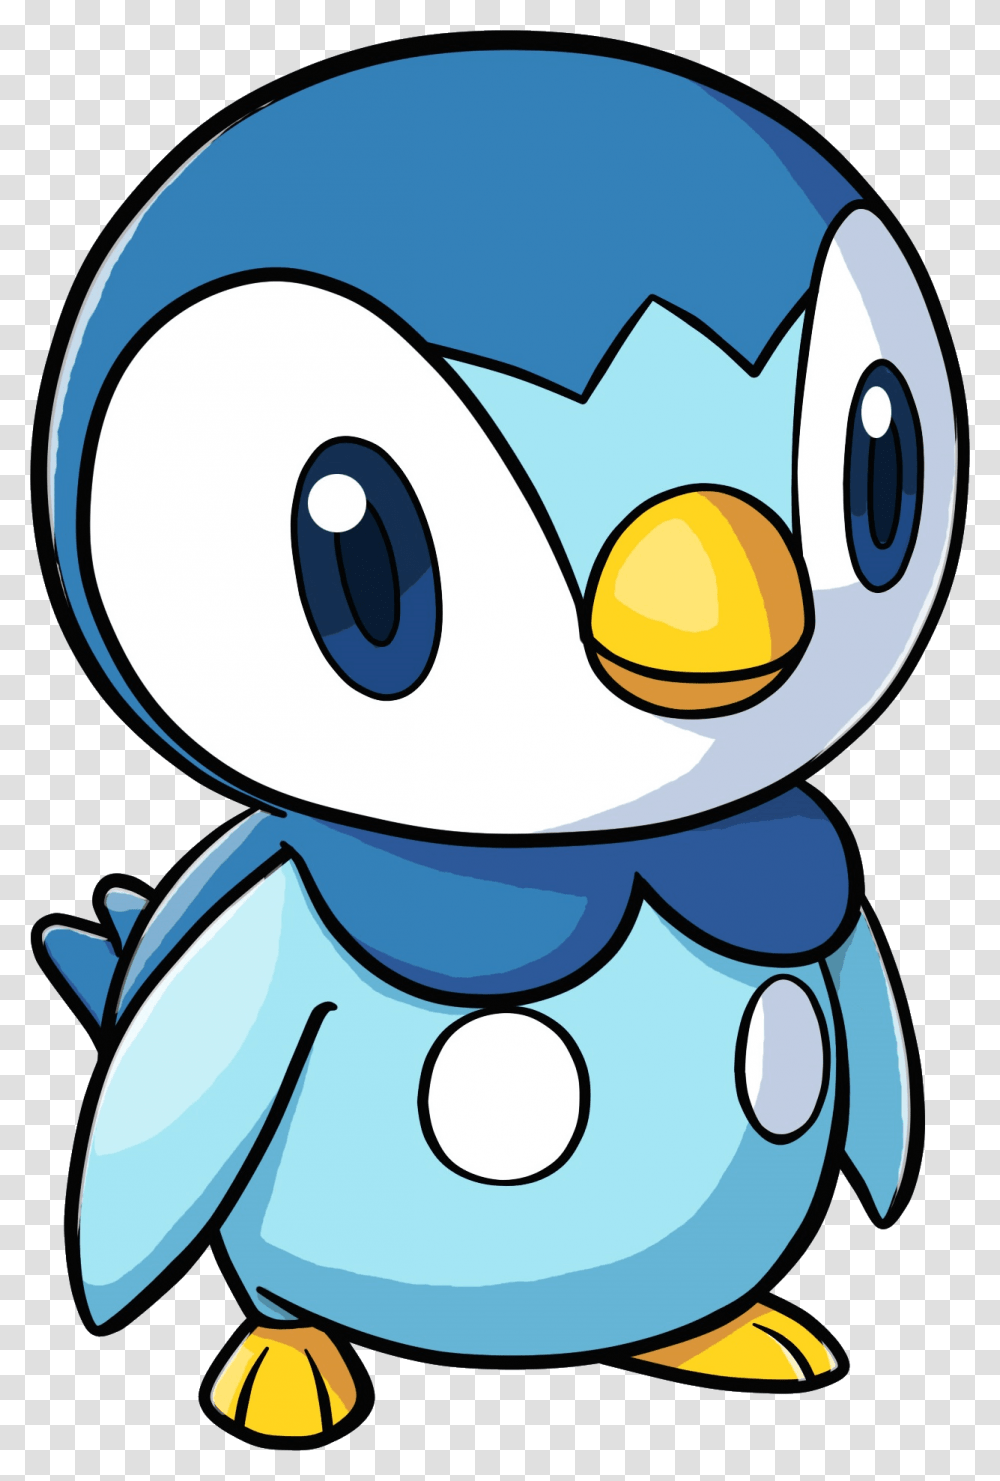 Pokmon Go Community Day - Bard & Baker Board Game Caf Pokemon Piplup, Art, Outdoors, Graphics, Doodle Transparent Png